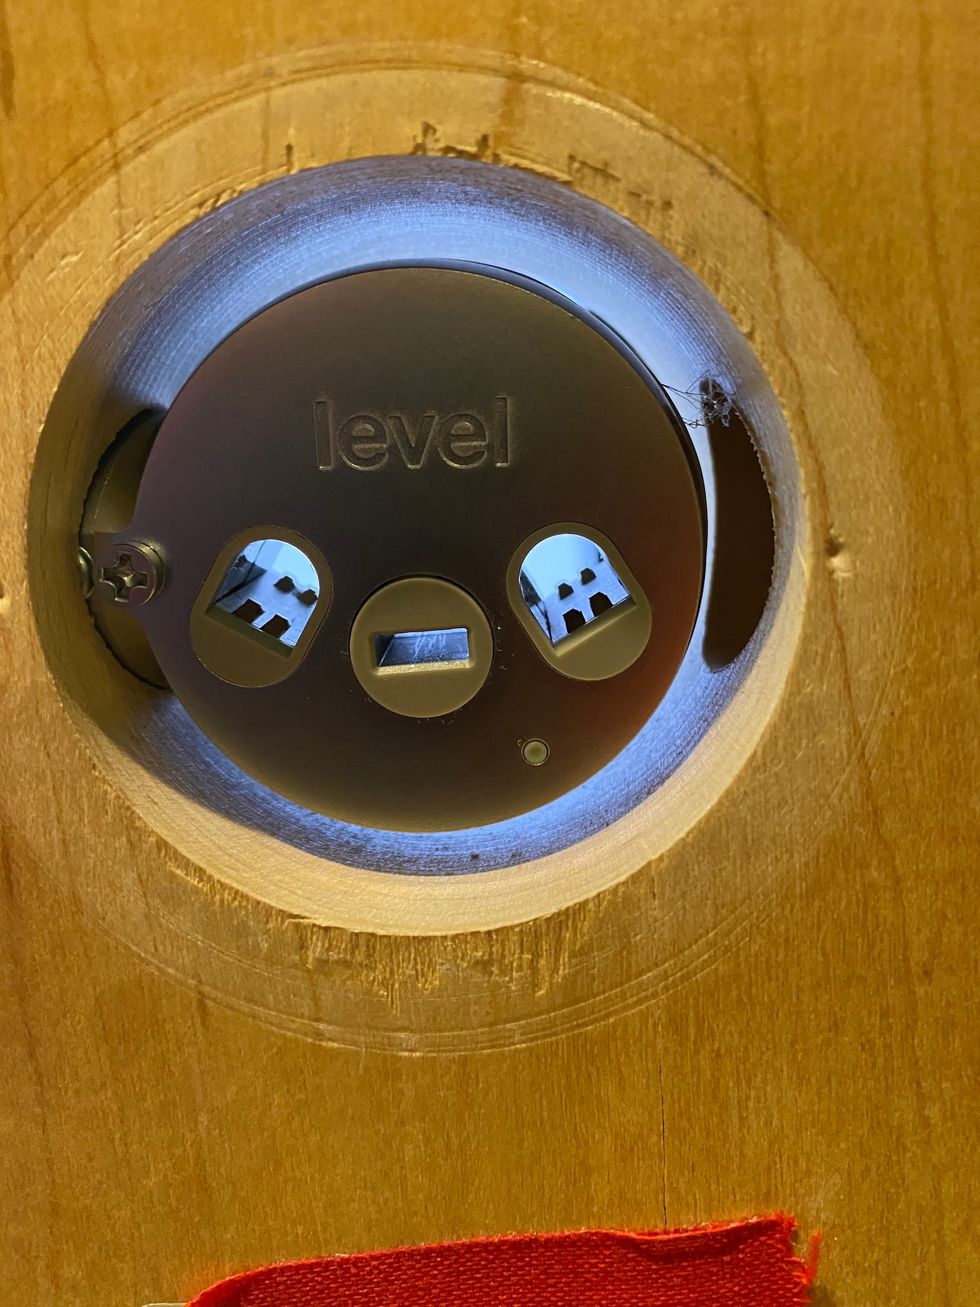 A photo of the Level Bolt inside a door hole.